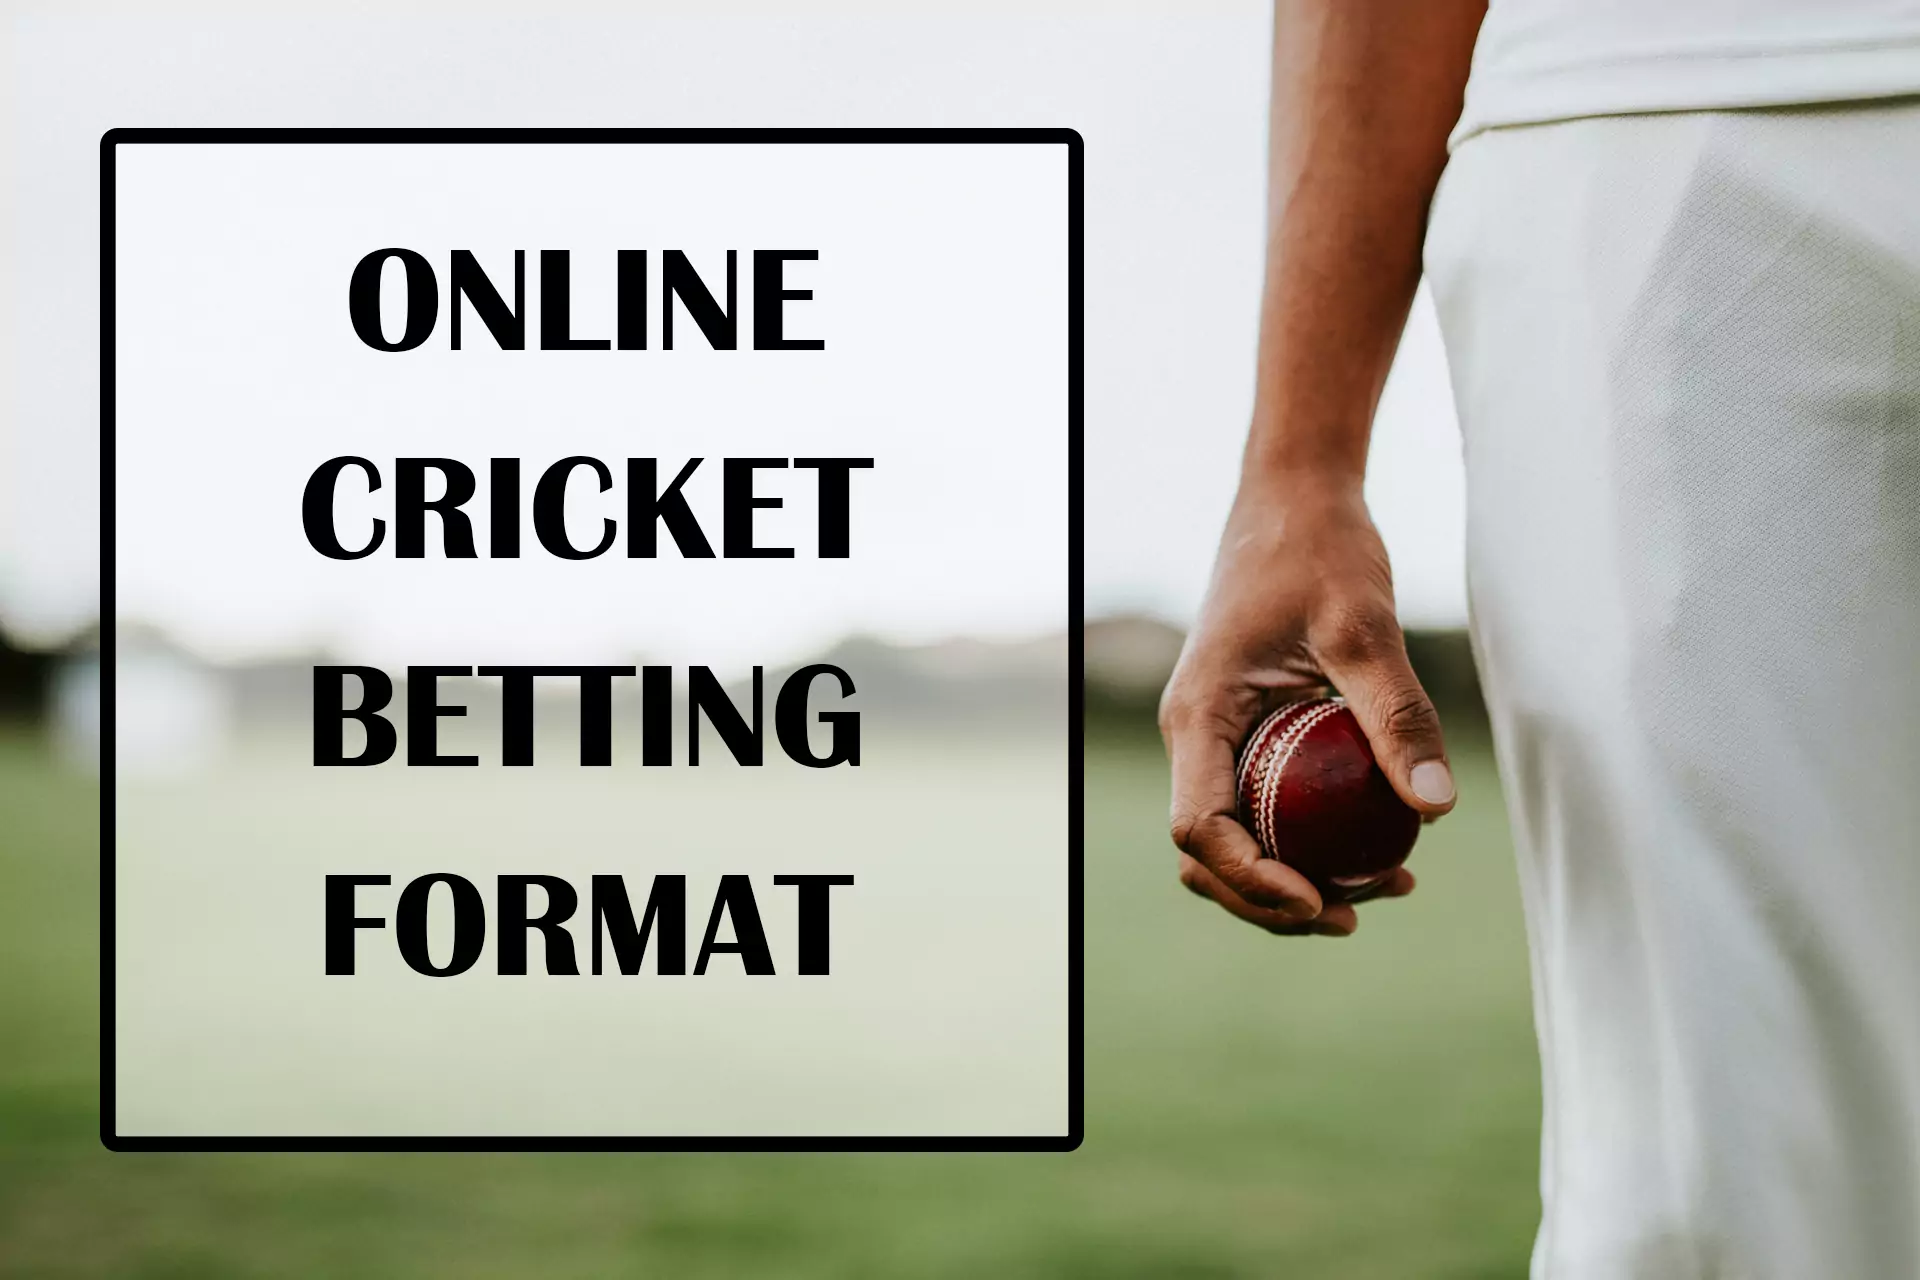 Bookmakers offer many formats of online cricket betting in India.